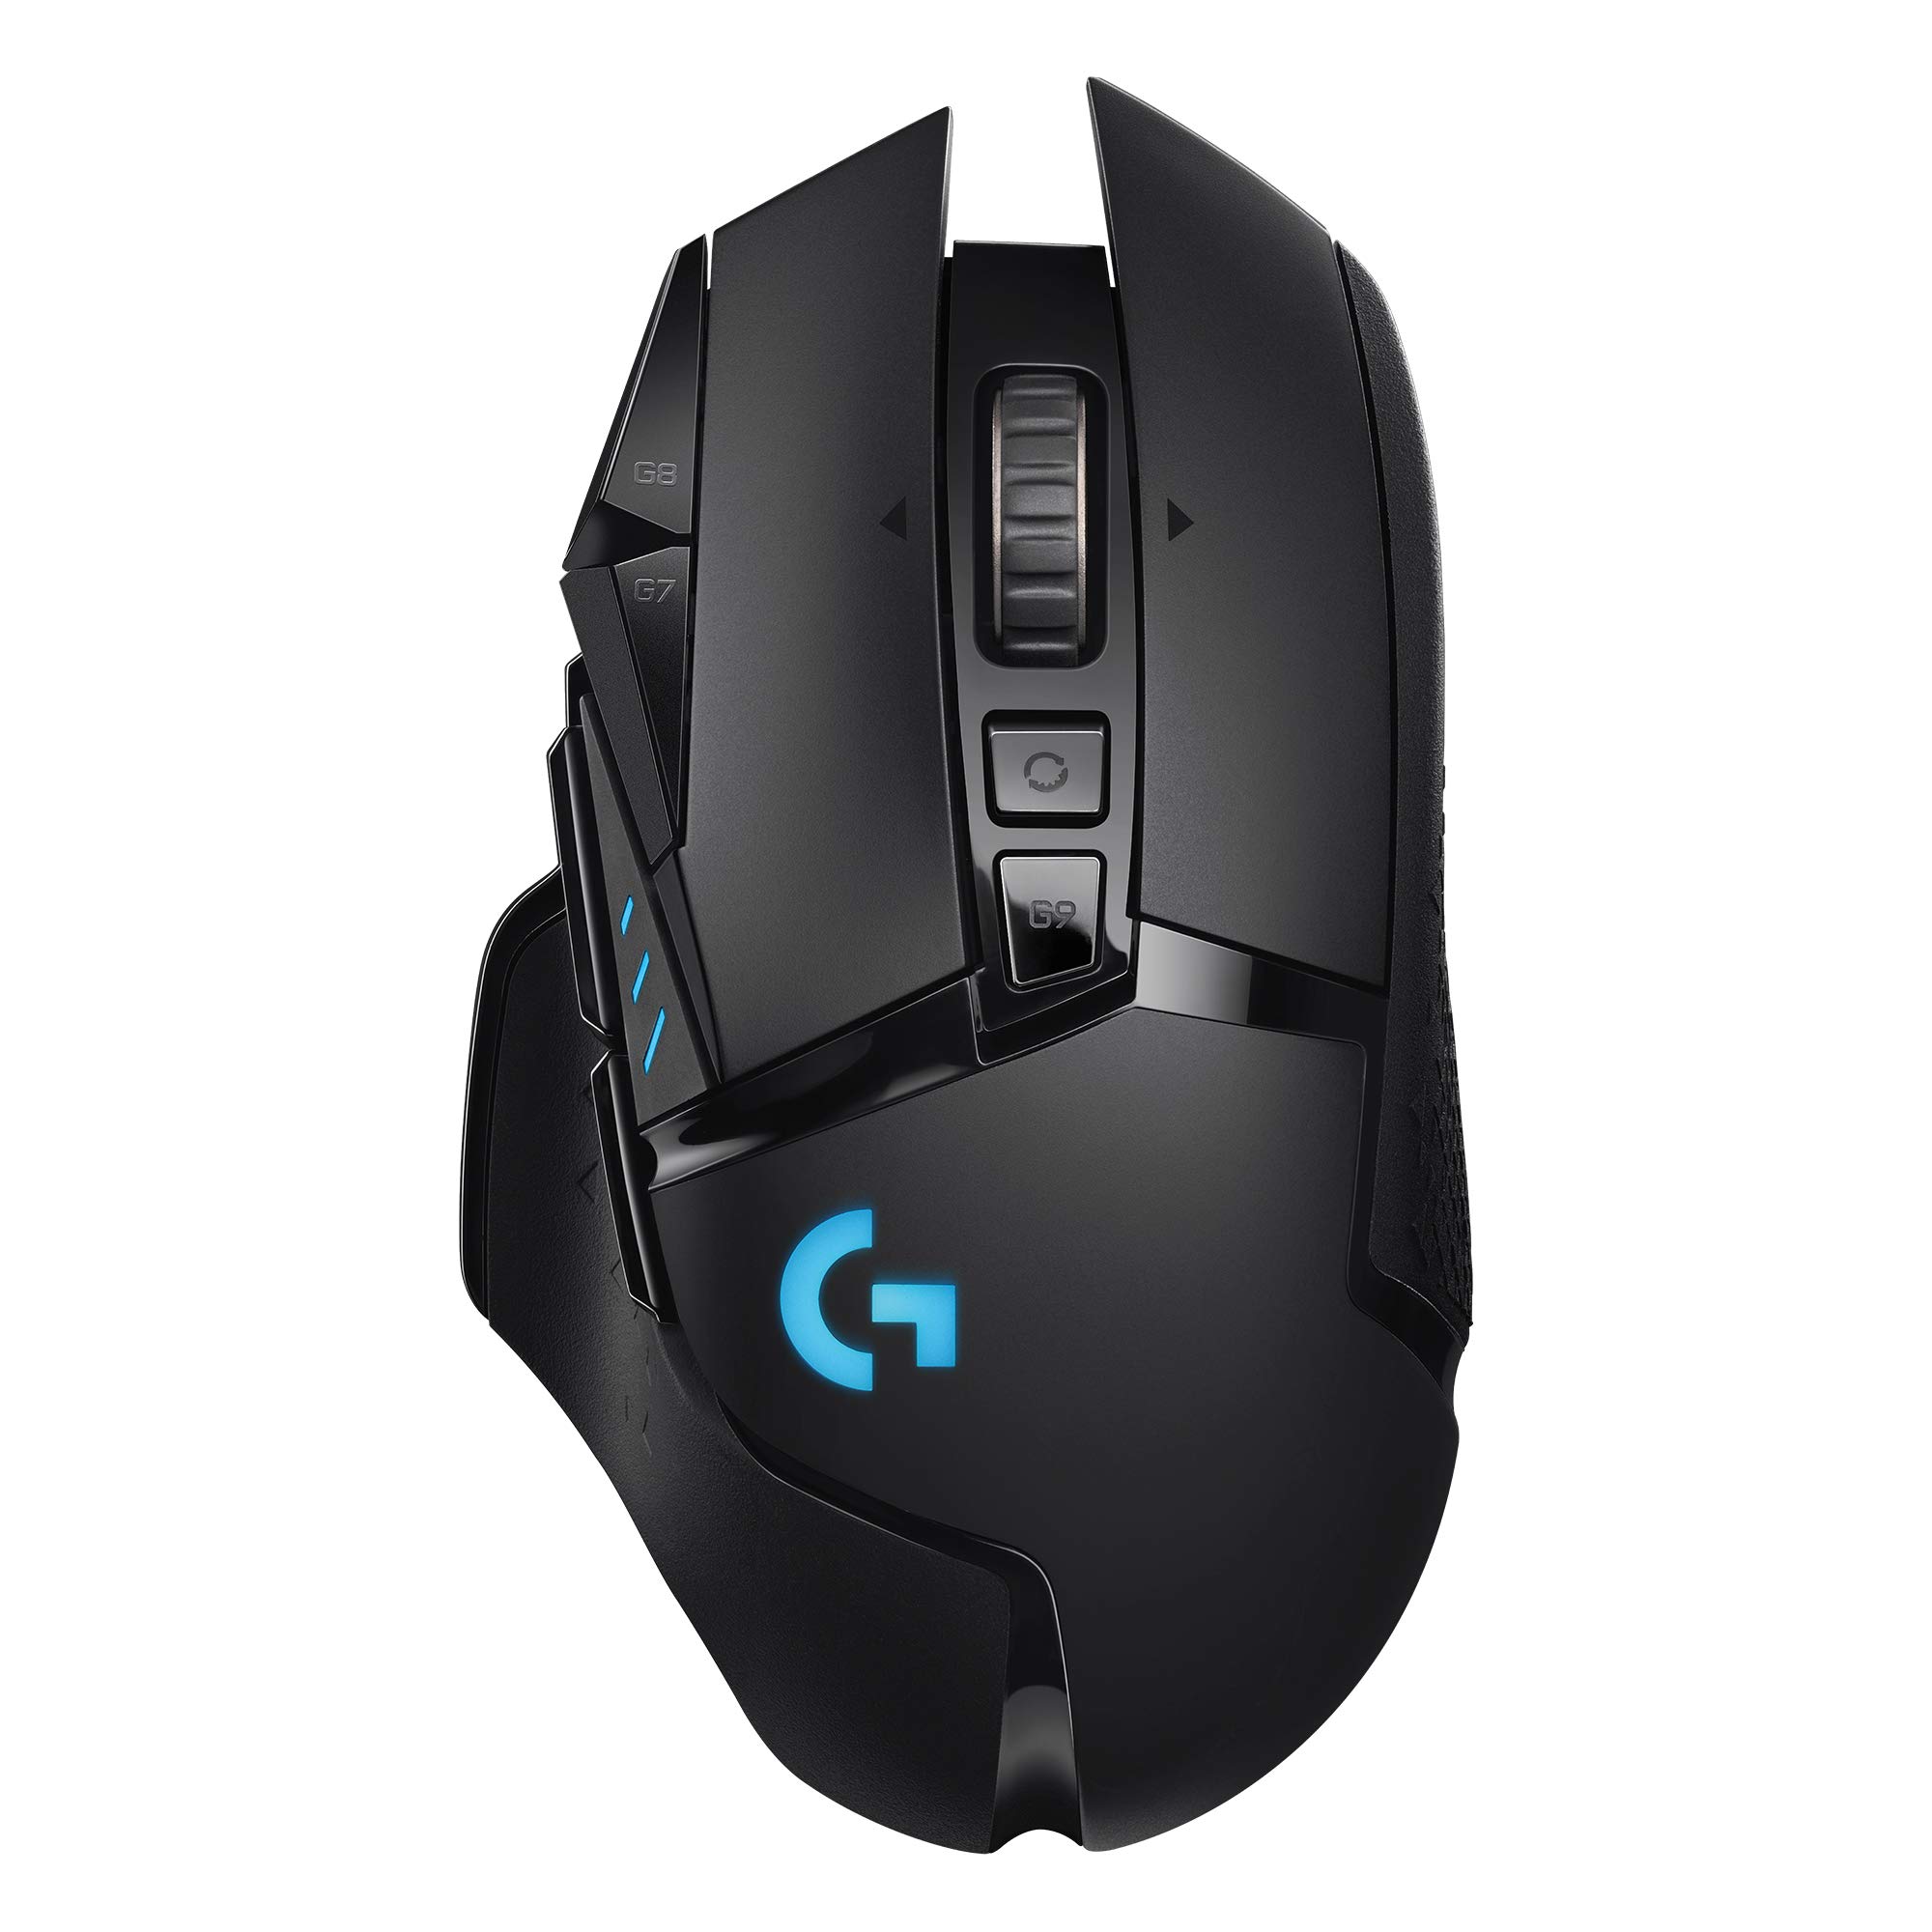 Logitech G502 Lightspeed Wireless Gaming Mouse w/ Lightsync RGB & Tunable Weights $84.50 + Free Shipping